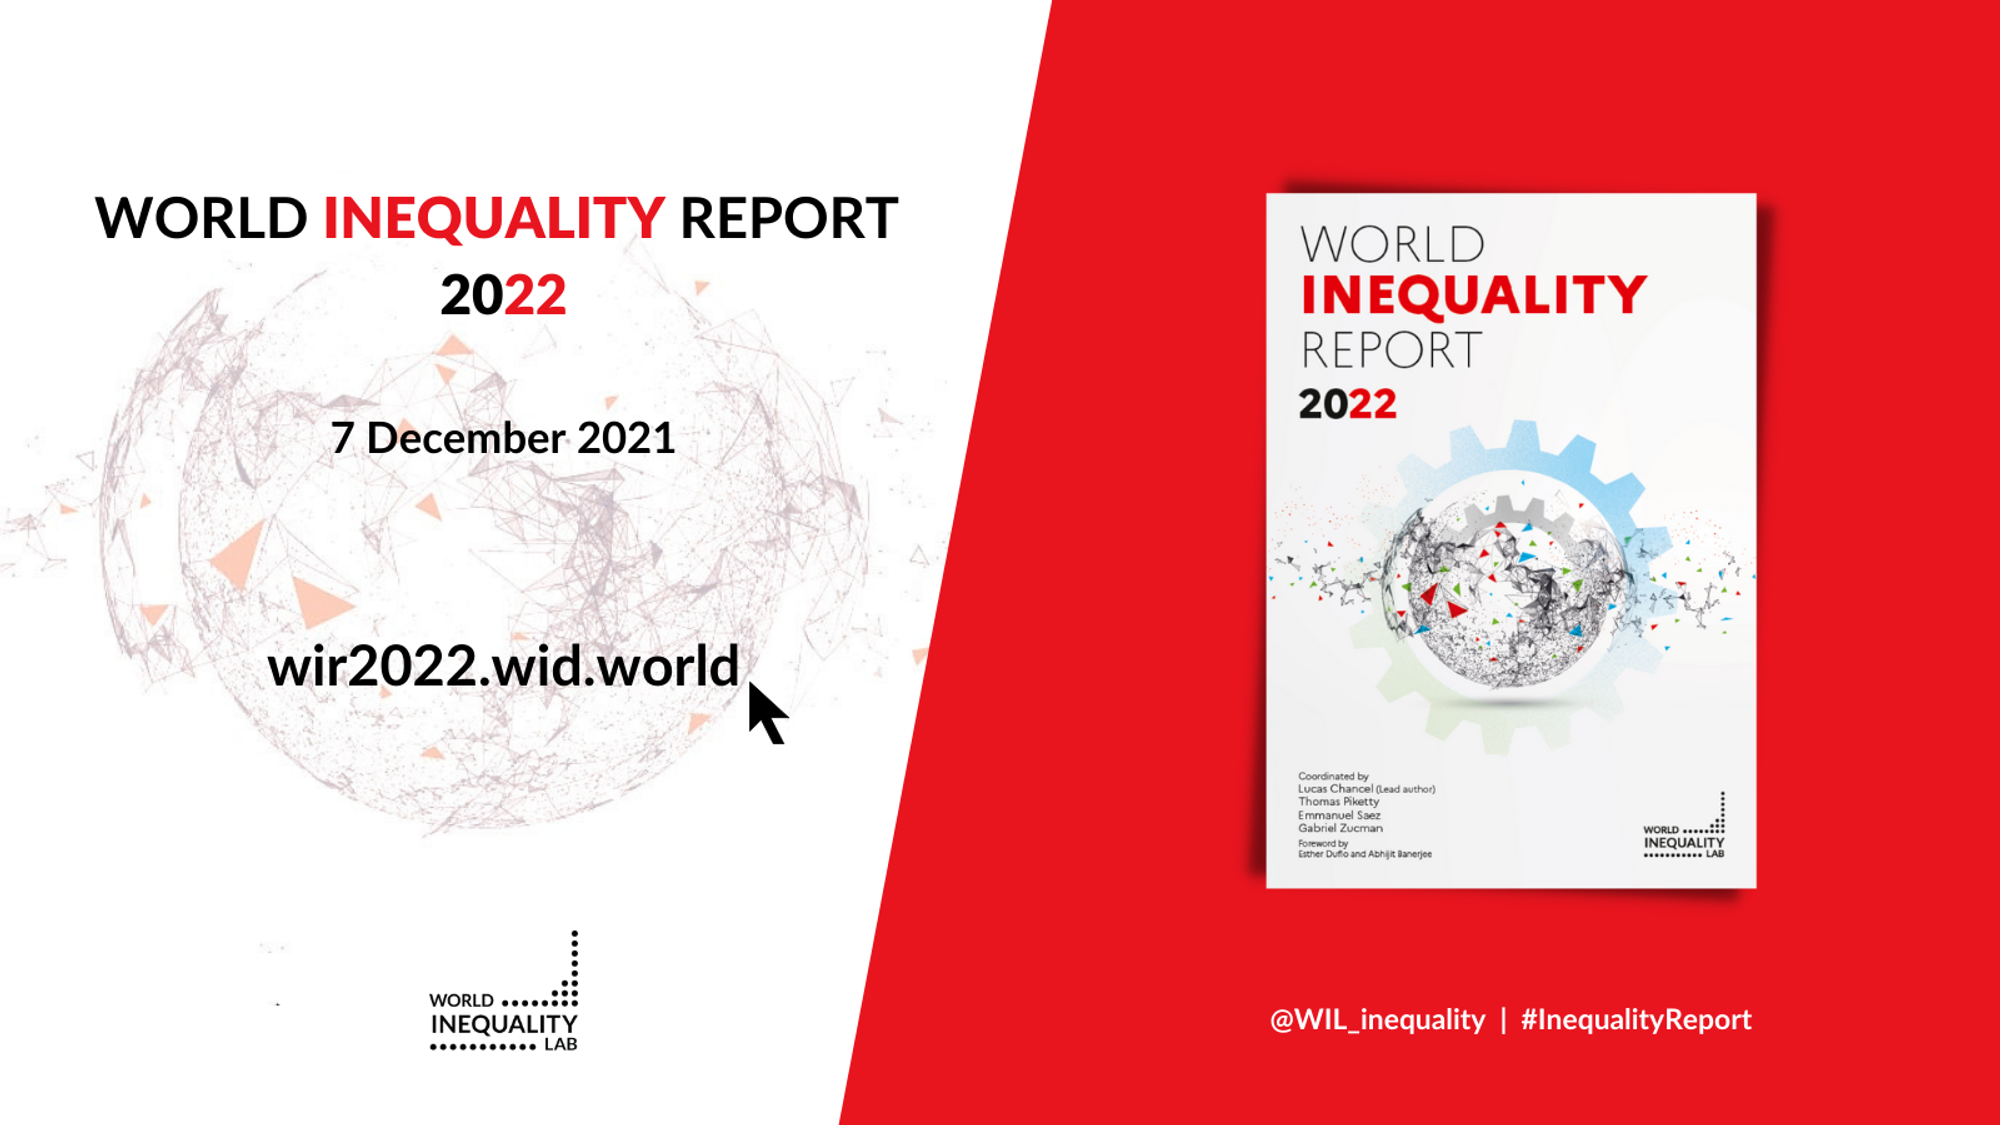 The World Inequality report 2022 presents the most up-to-date & complete data on inequality worldwide: